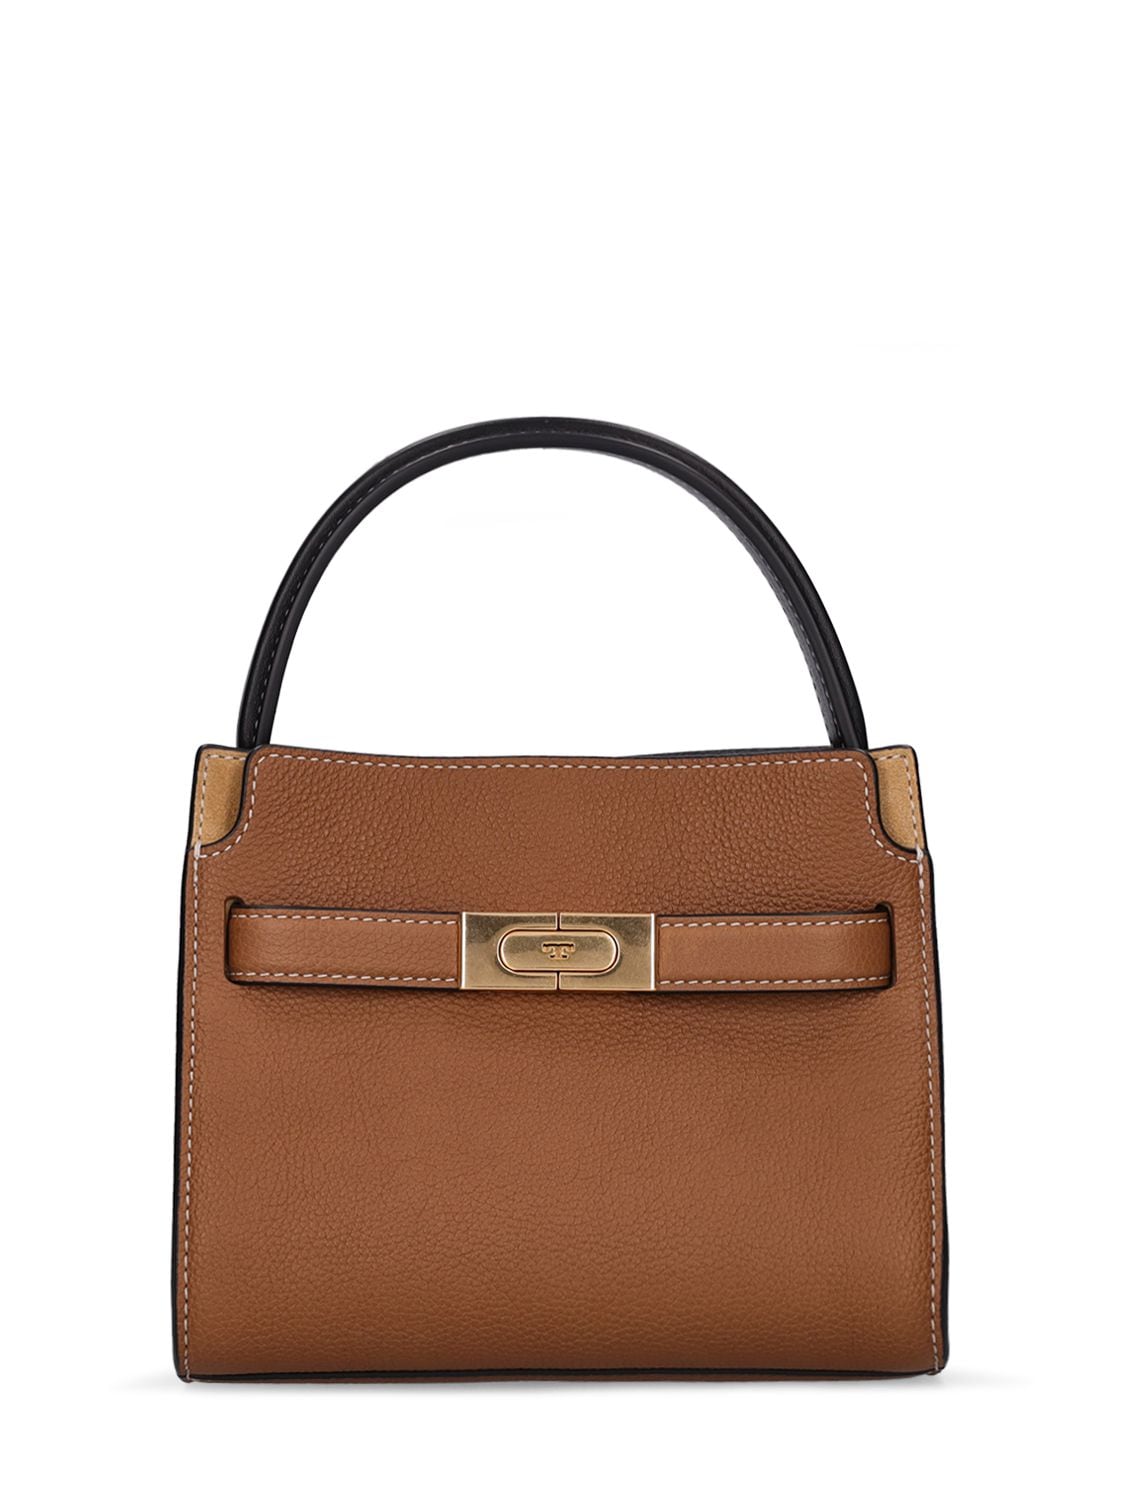 Tory Burch Petite Double Lee Radziwill Pebbled Bag In Tiger's Eye ...